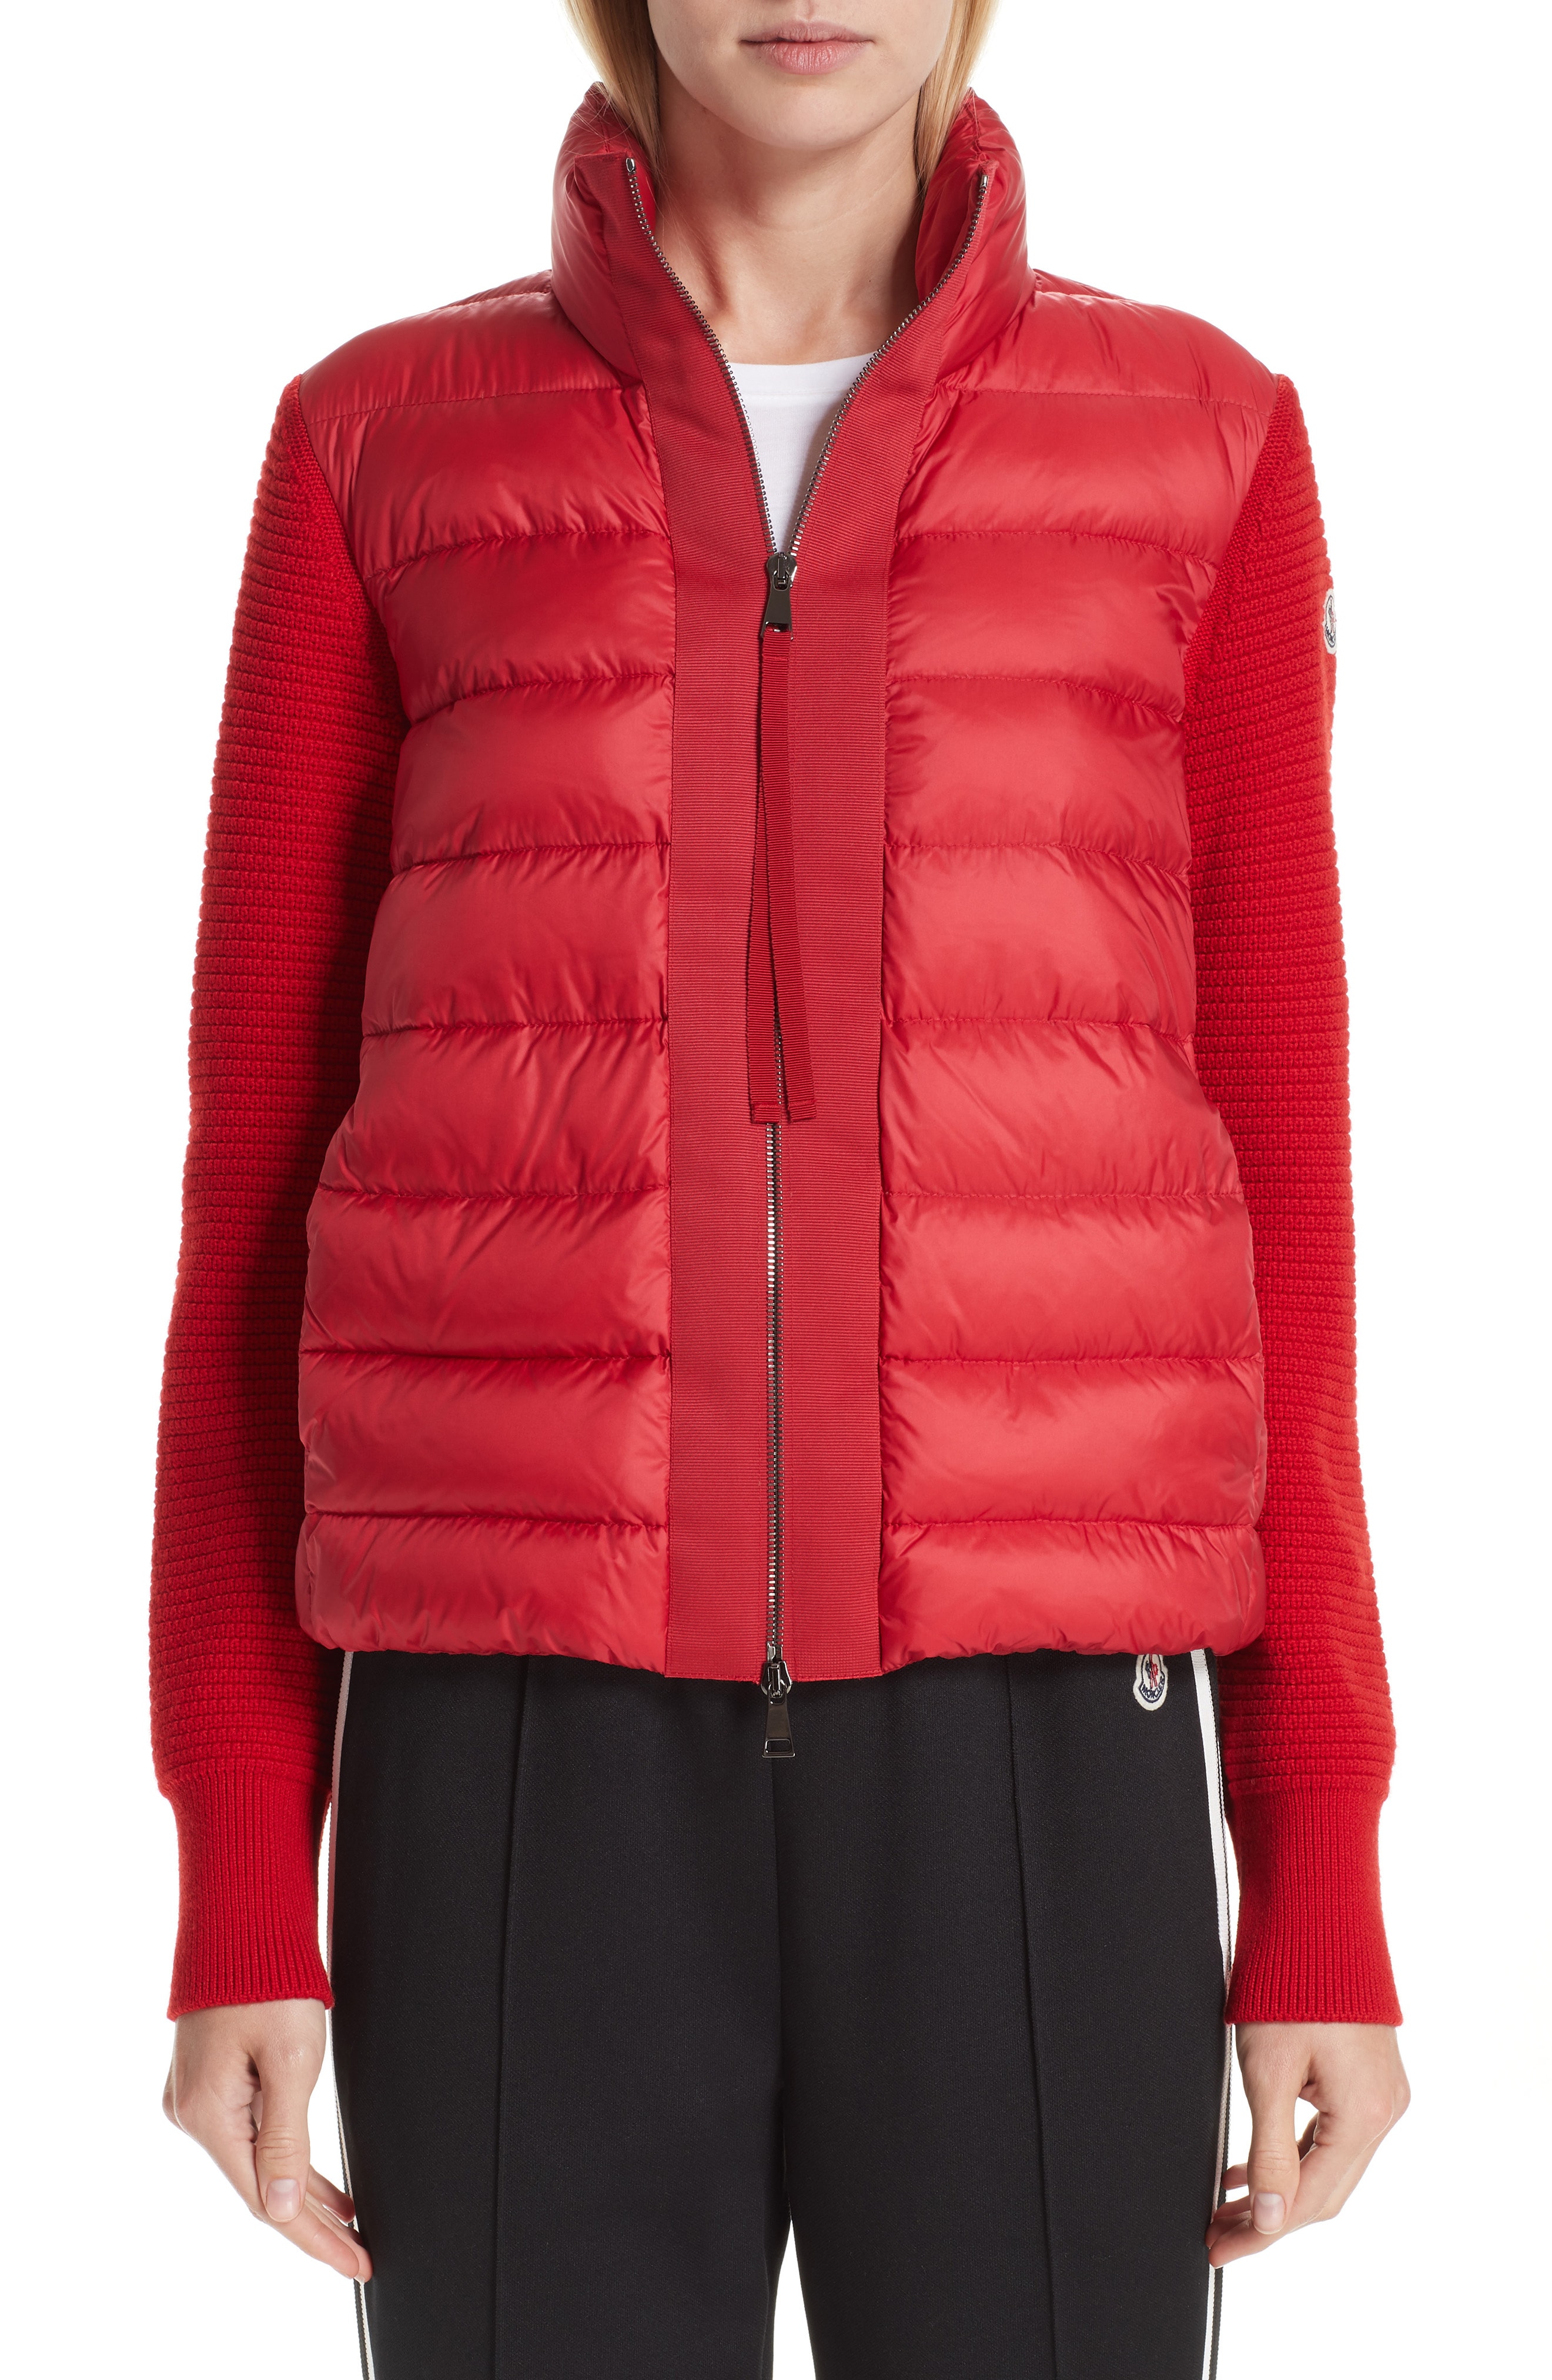 Women's Red Coats & Jackets: Puffer & Down | Nordstrom